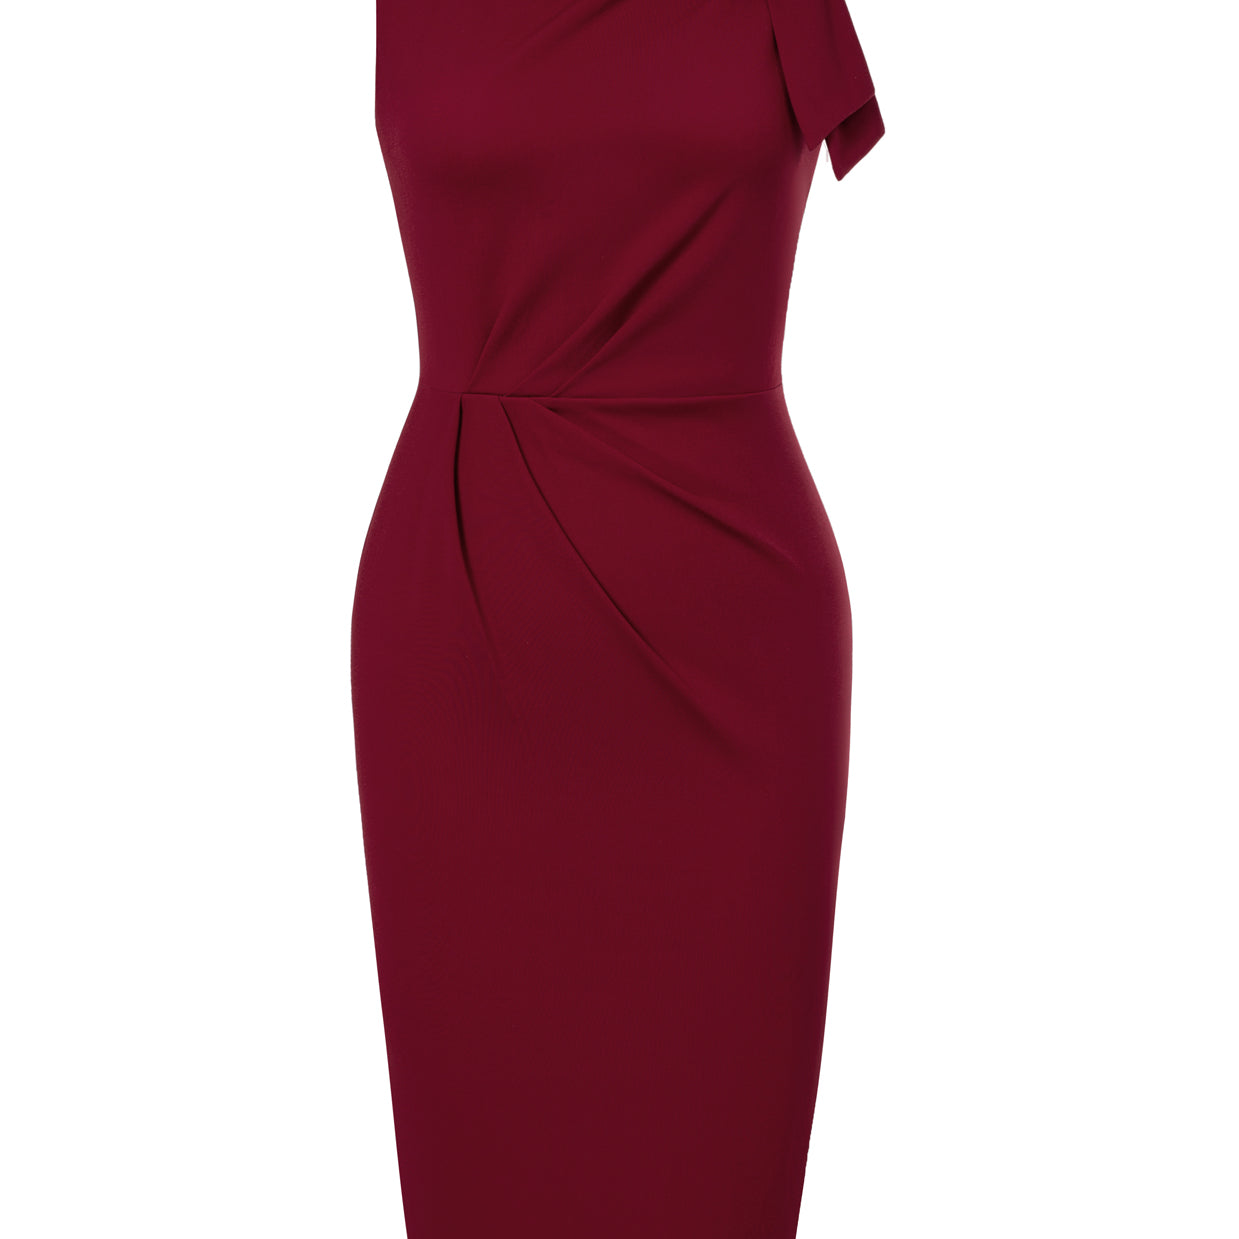 Seckill Offer⌛Sleeveless Ruched Bodycon Dress with Tie Shoulder Business Cocktail Party Wedding Guest Dress